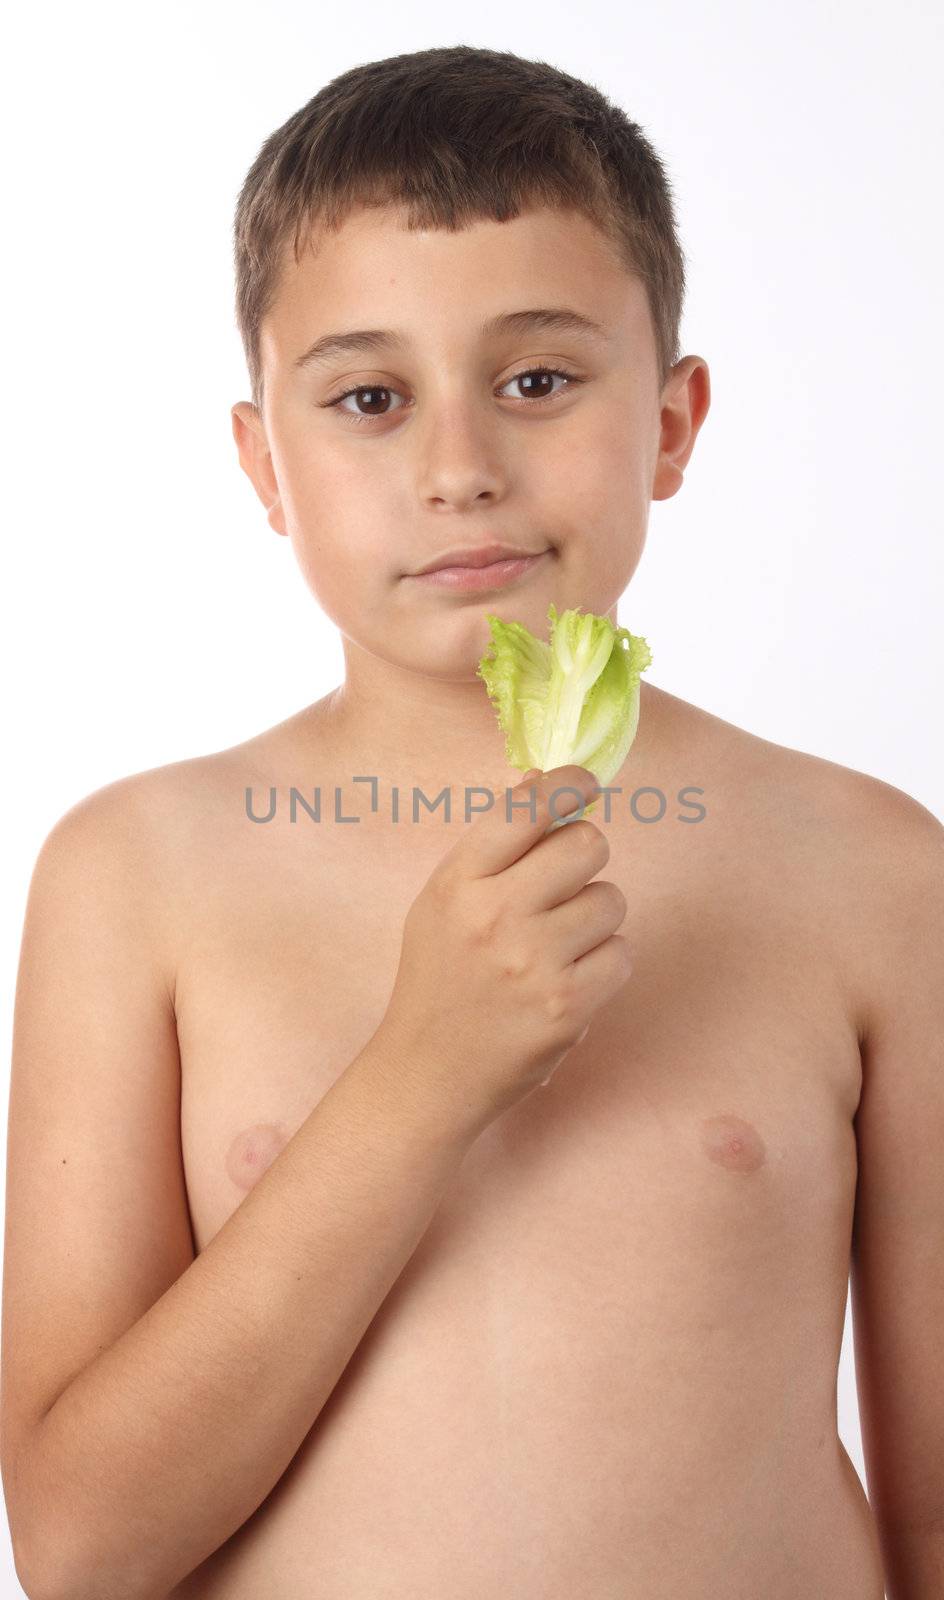 Boy eating a sprig of lettuce. Healthy diet concept